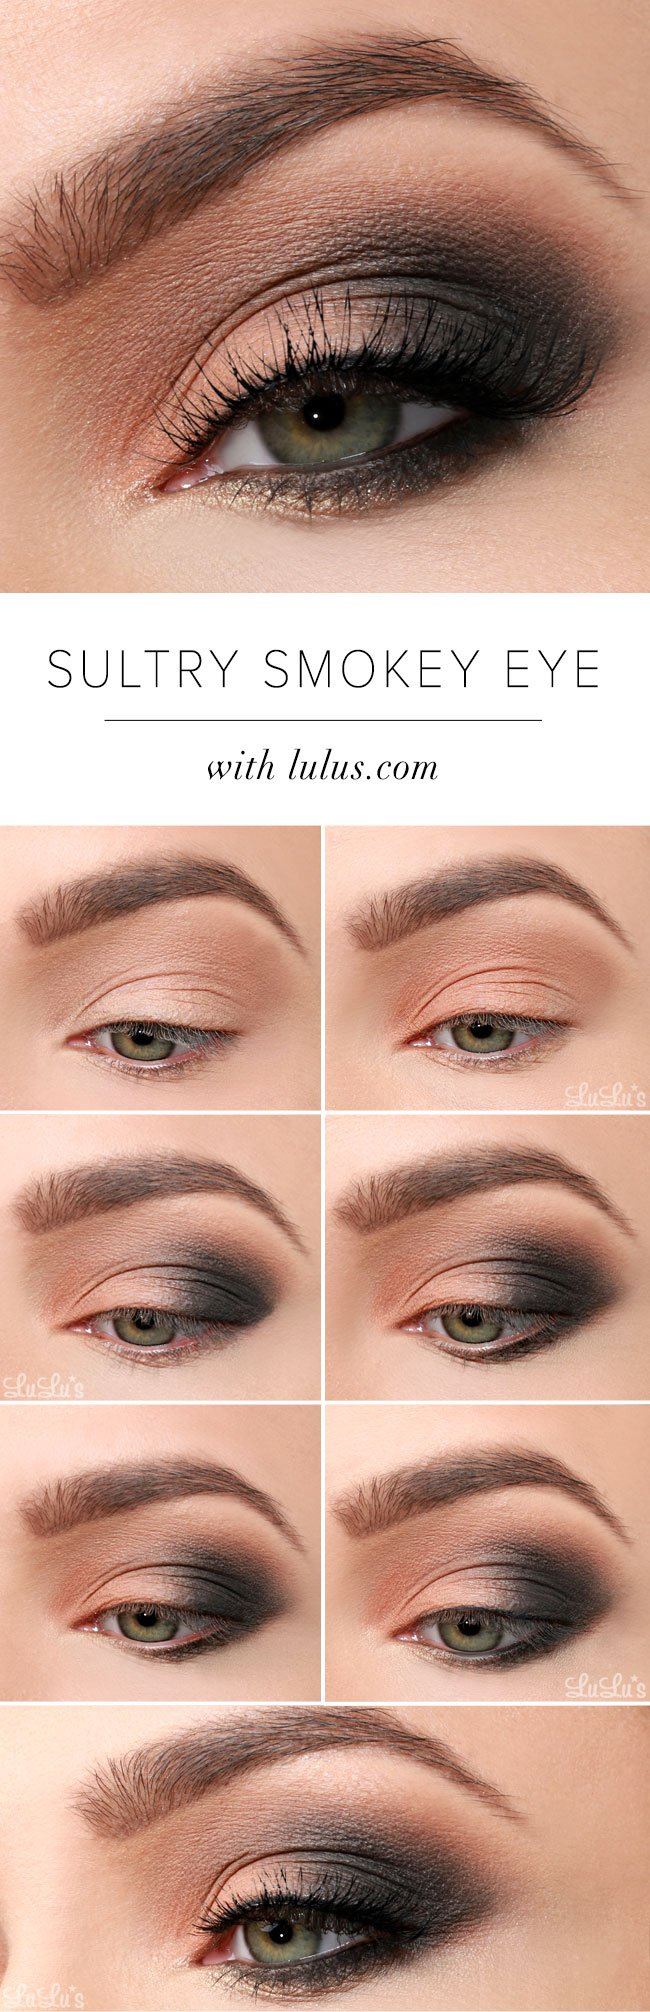 How To Do Classy Eye Makeup 15 Smokey Eye Tutorials Step Step Guide To Perfect Hollywood Makeup